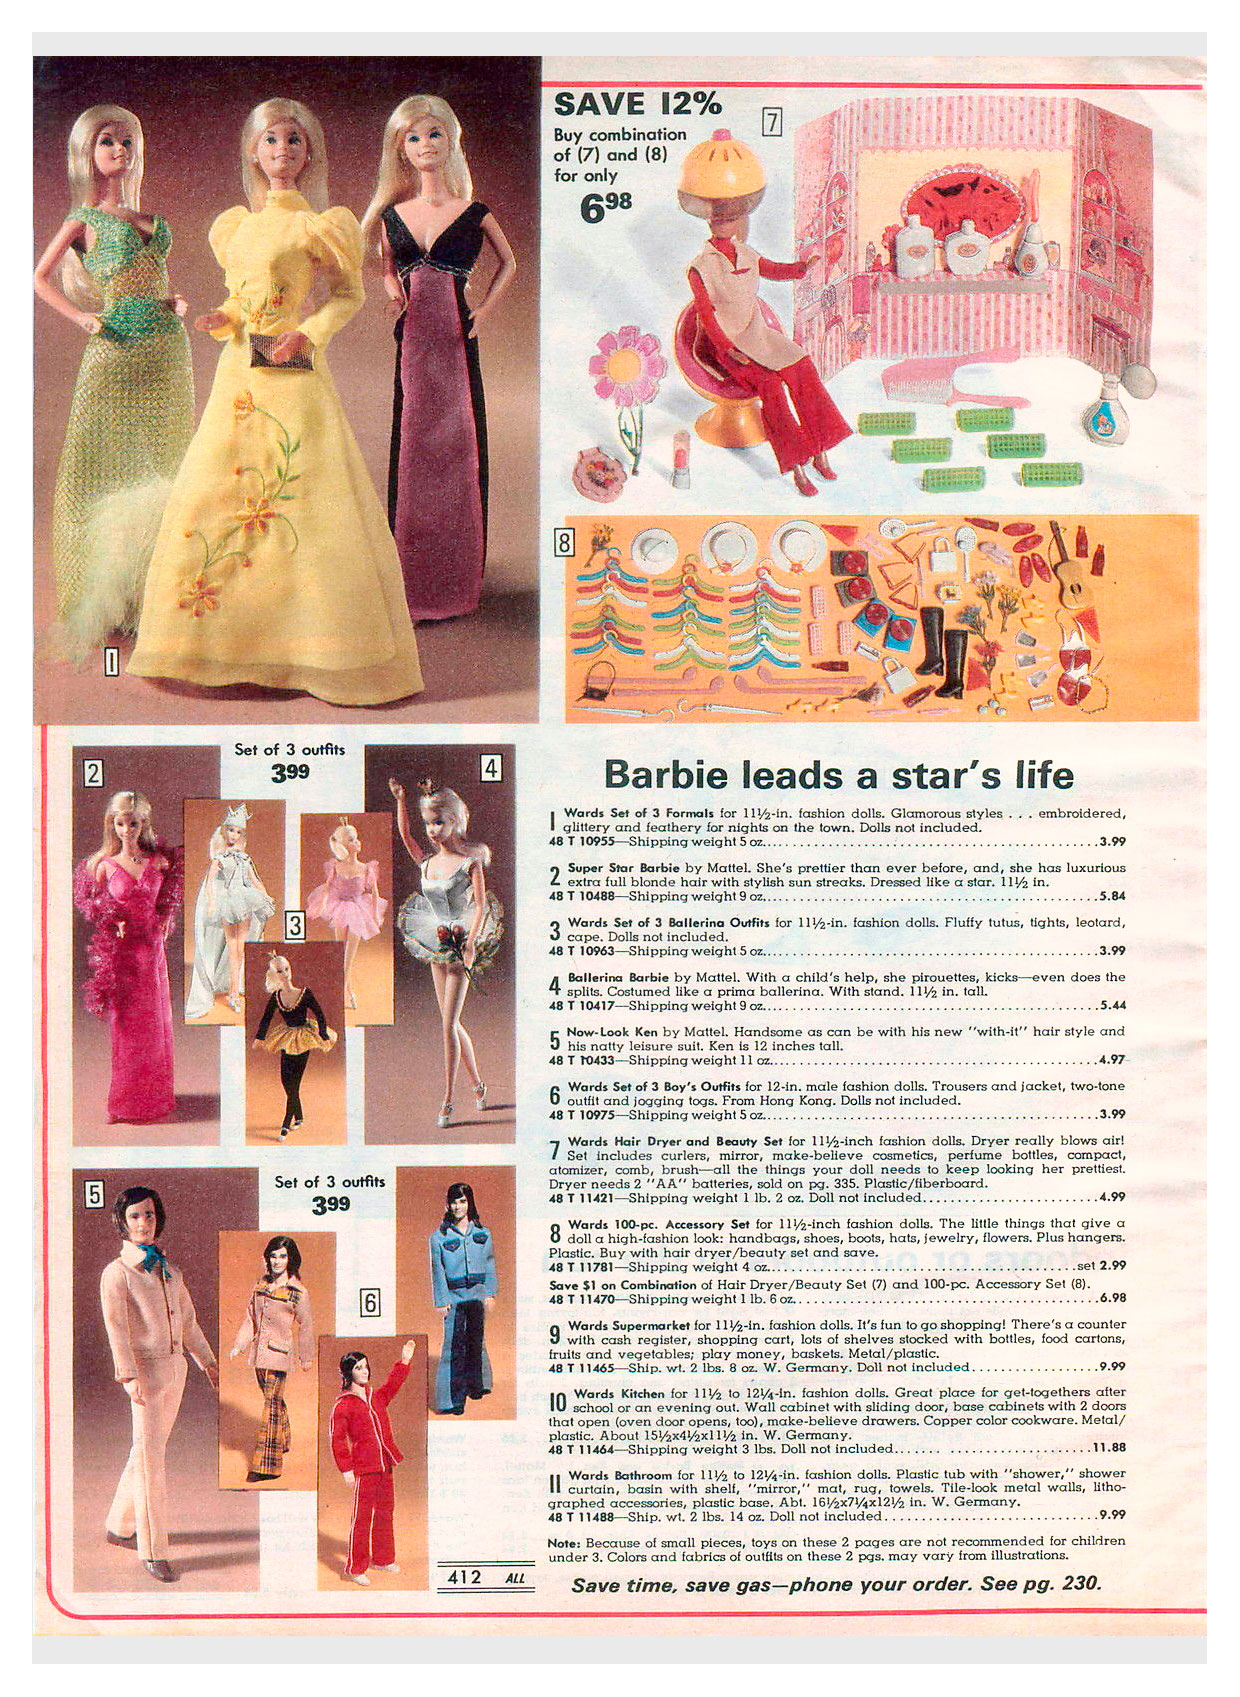 From 1977 Montgomery Ward Christmas catalogue